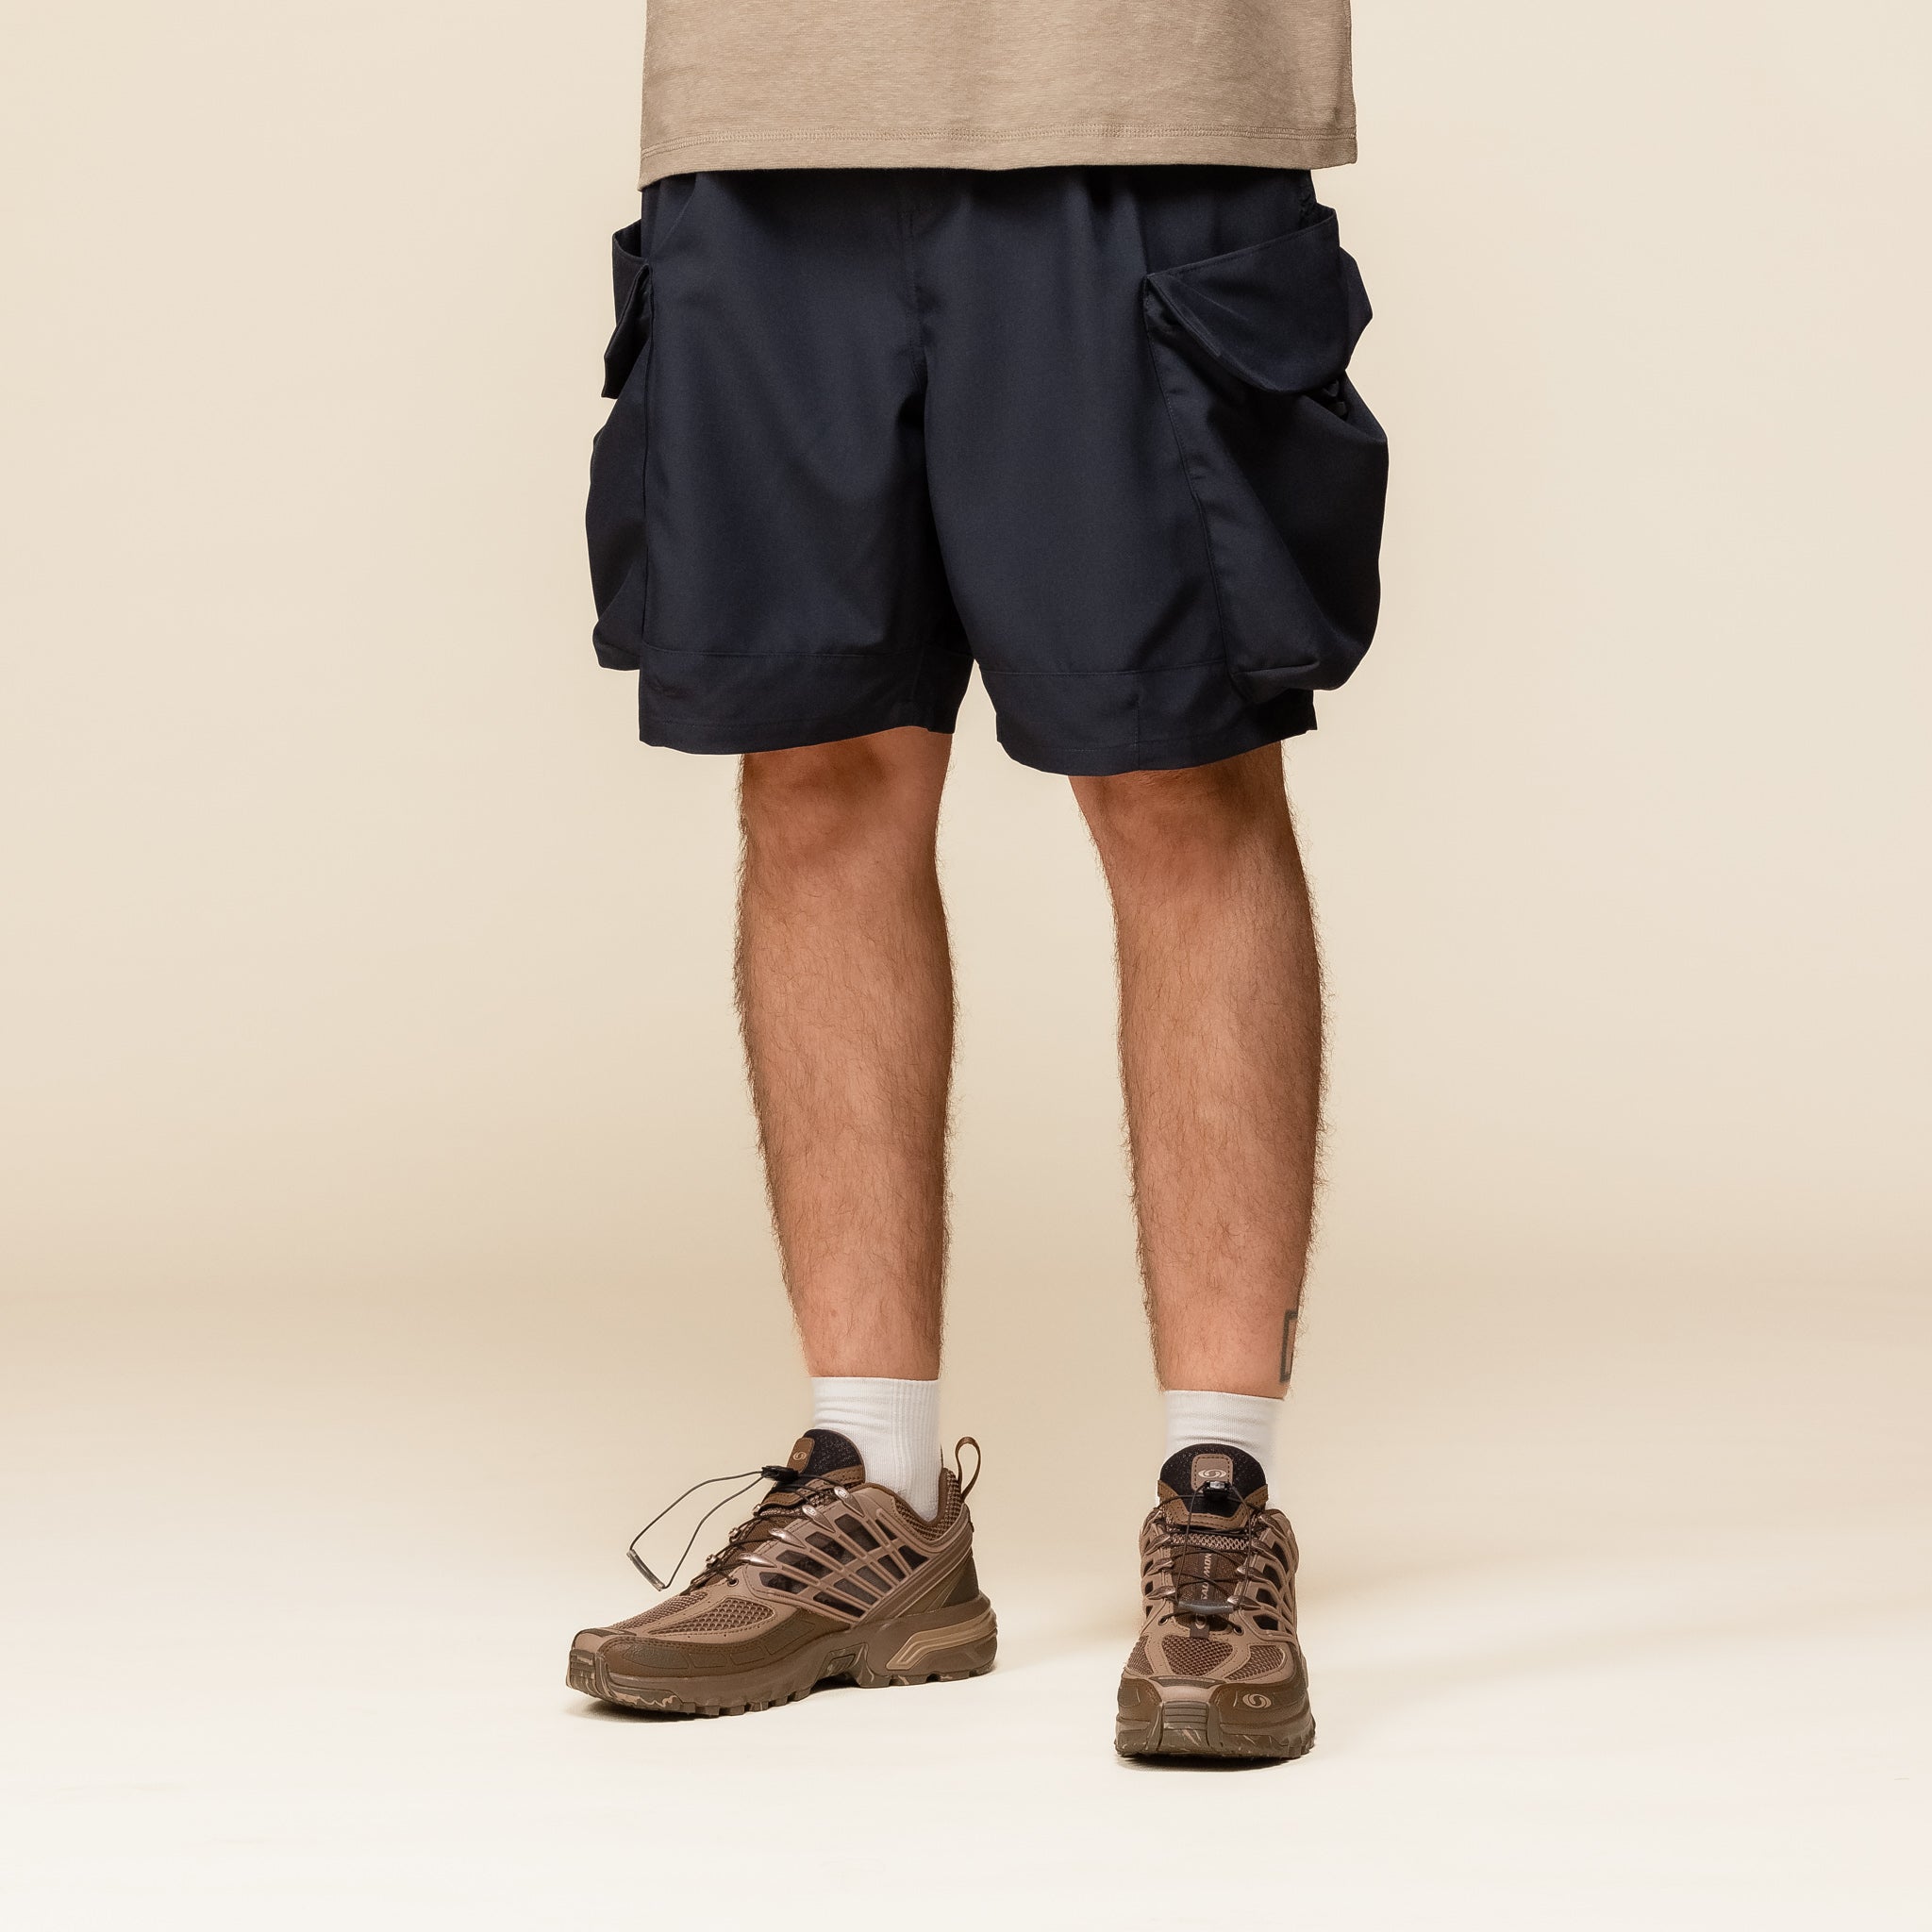 MW-PT24109 Meanswhile - Luggage Cargo Shorts - Navy Blue